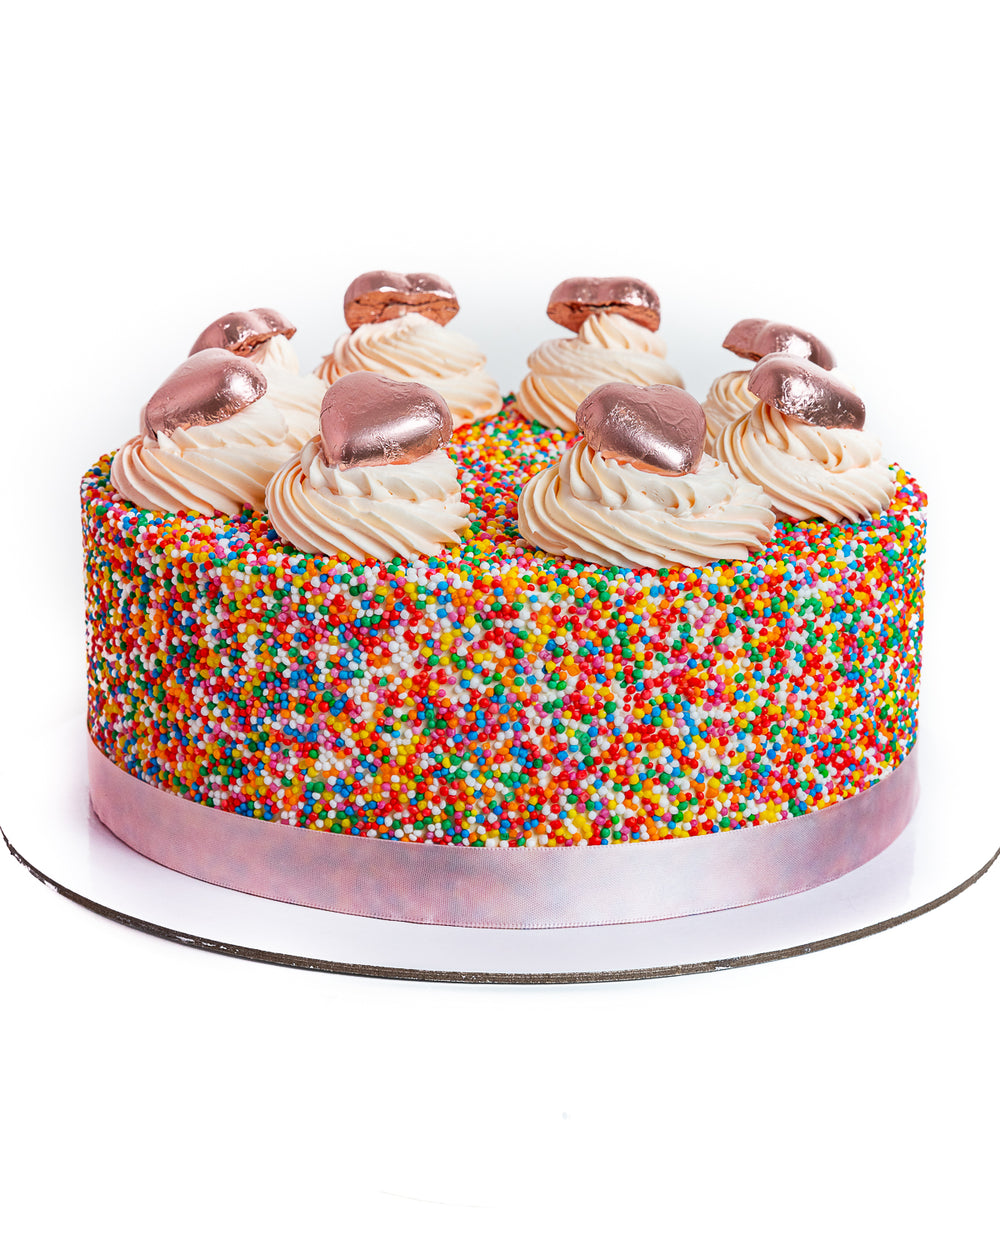 PARTY TIME SPRINKLE CAKE